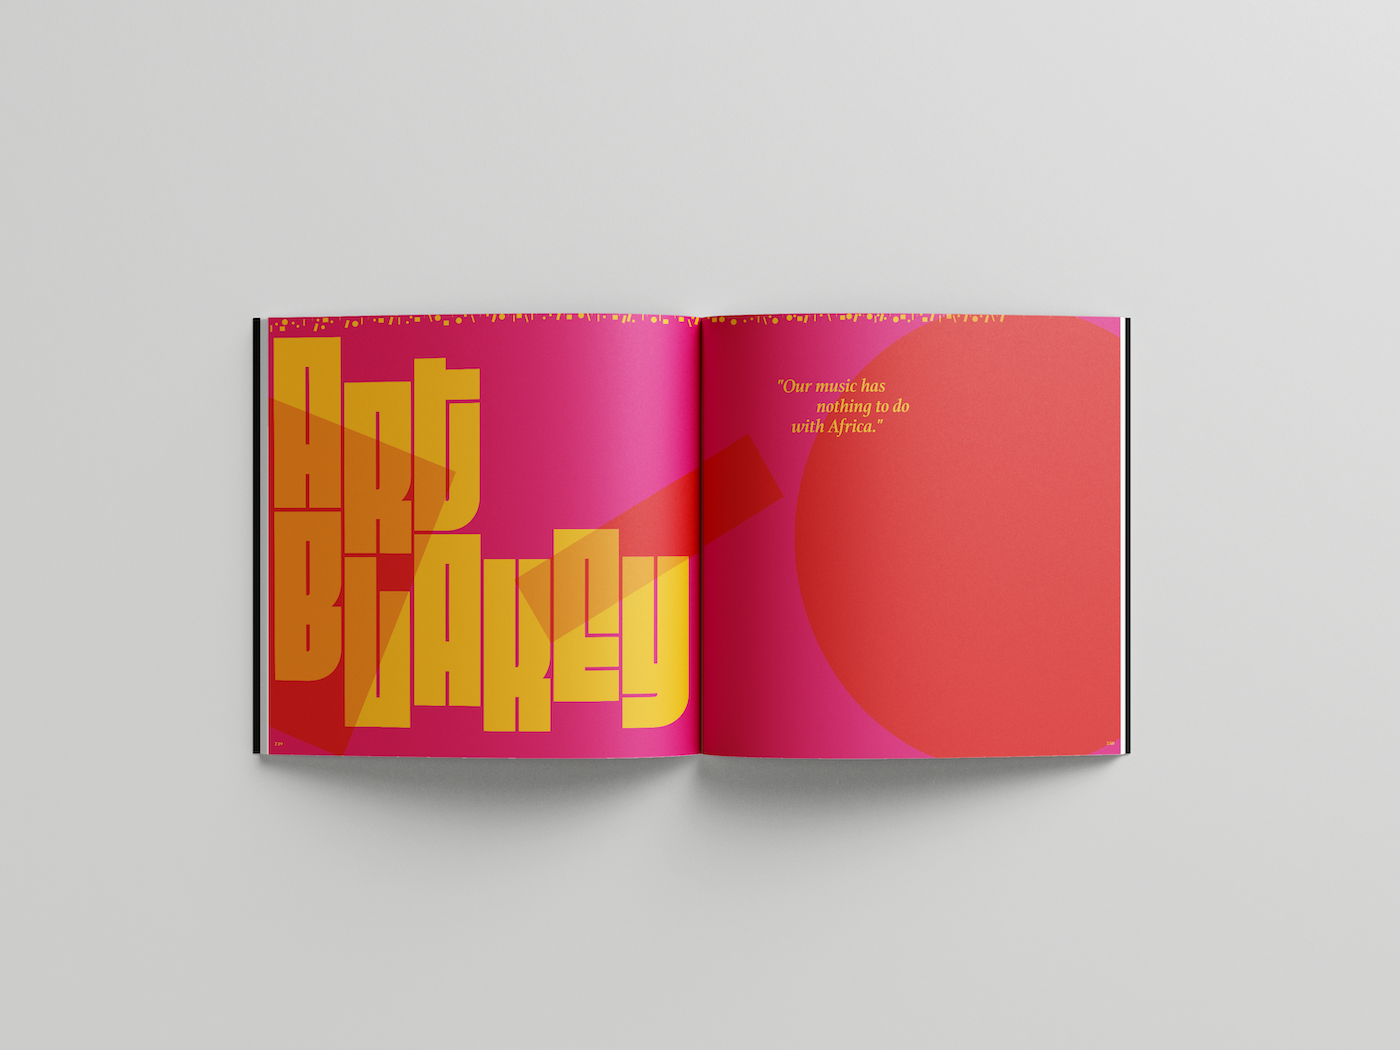 Typographic book spread in pink and yellow reflecting a Jazz influence.